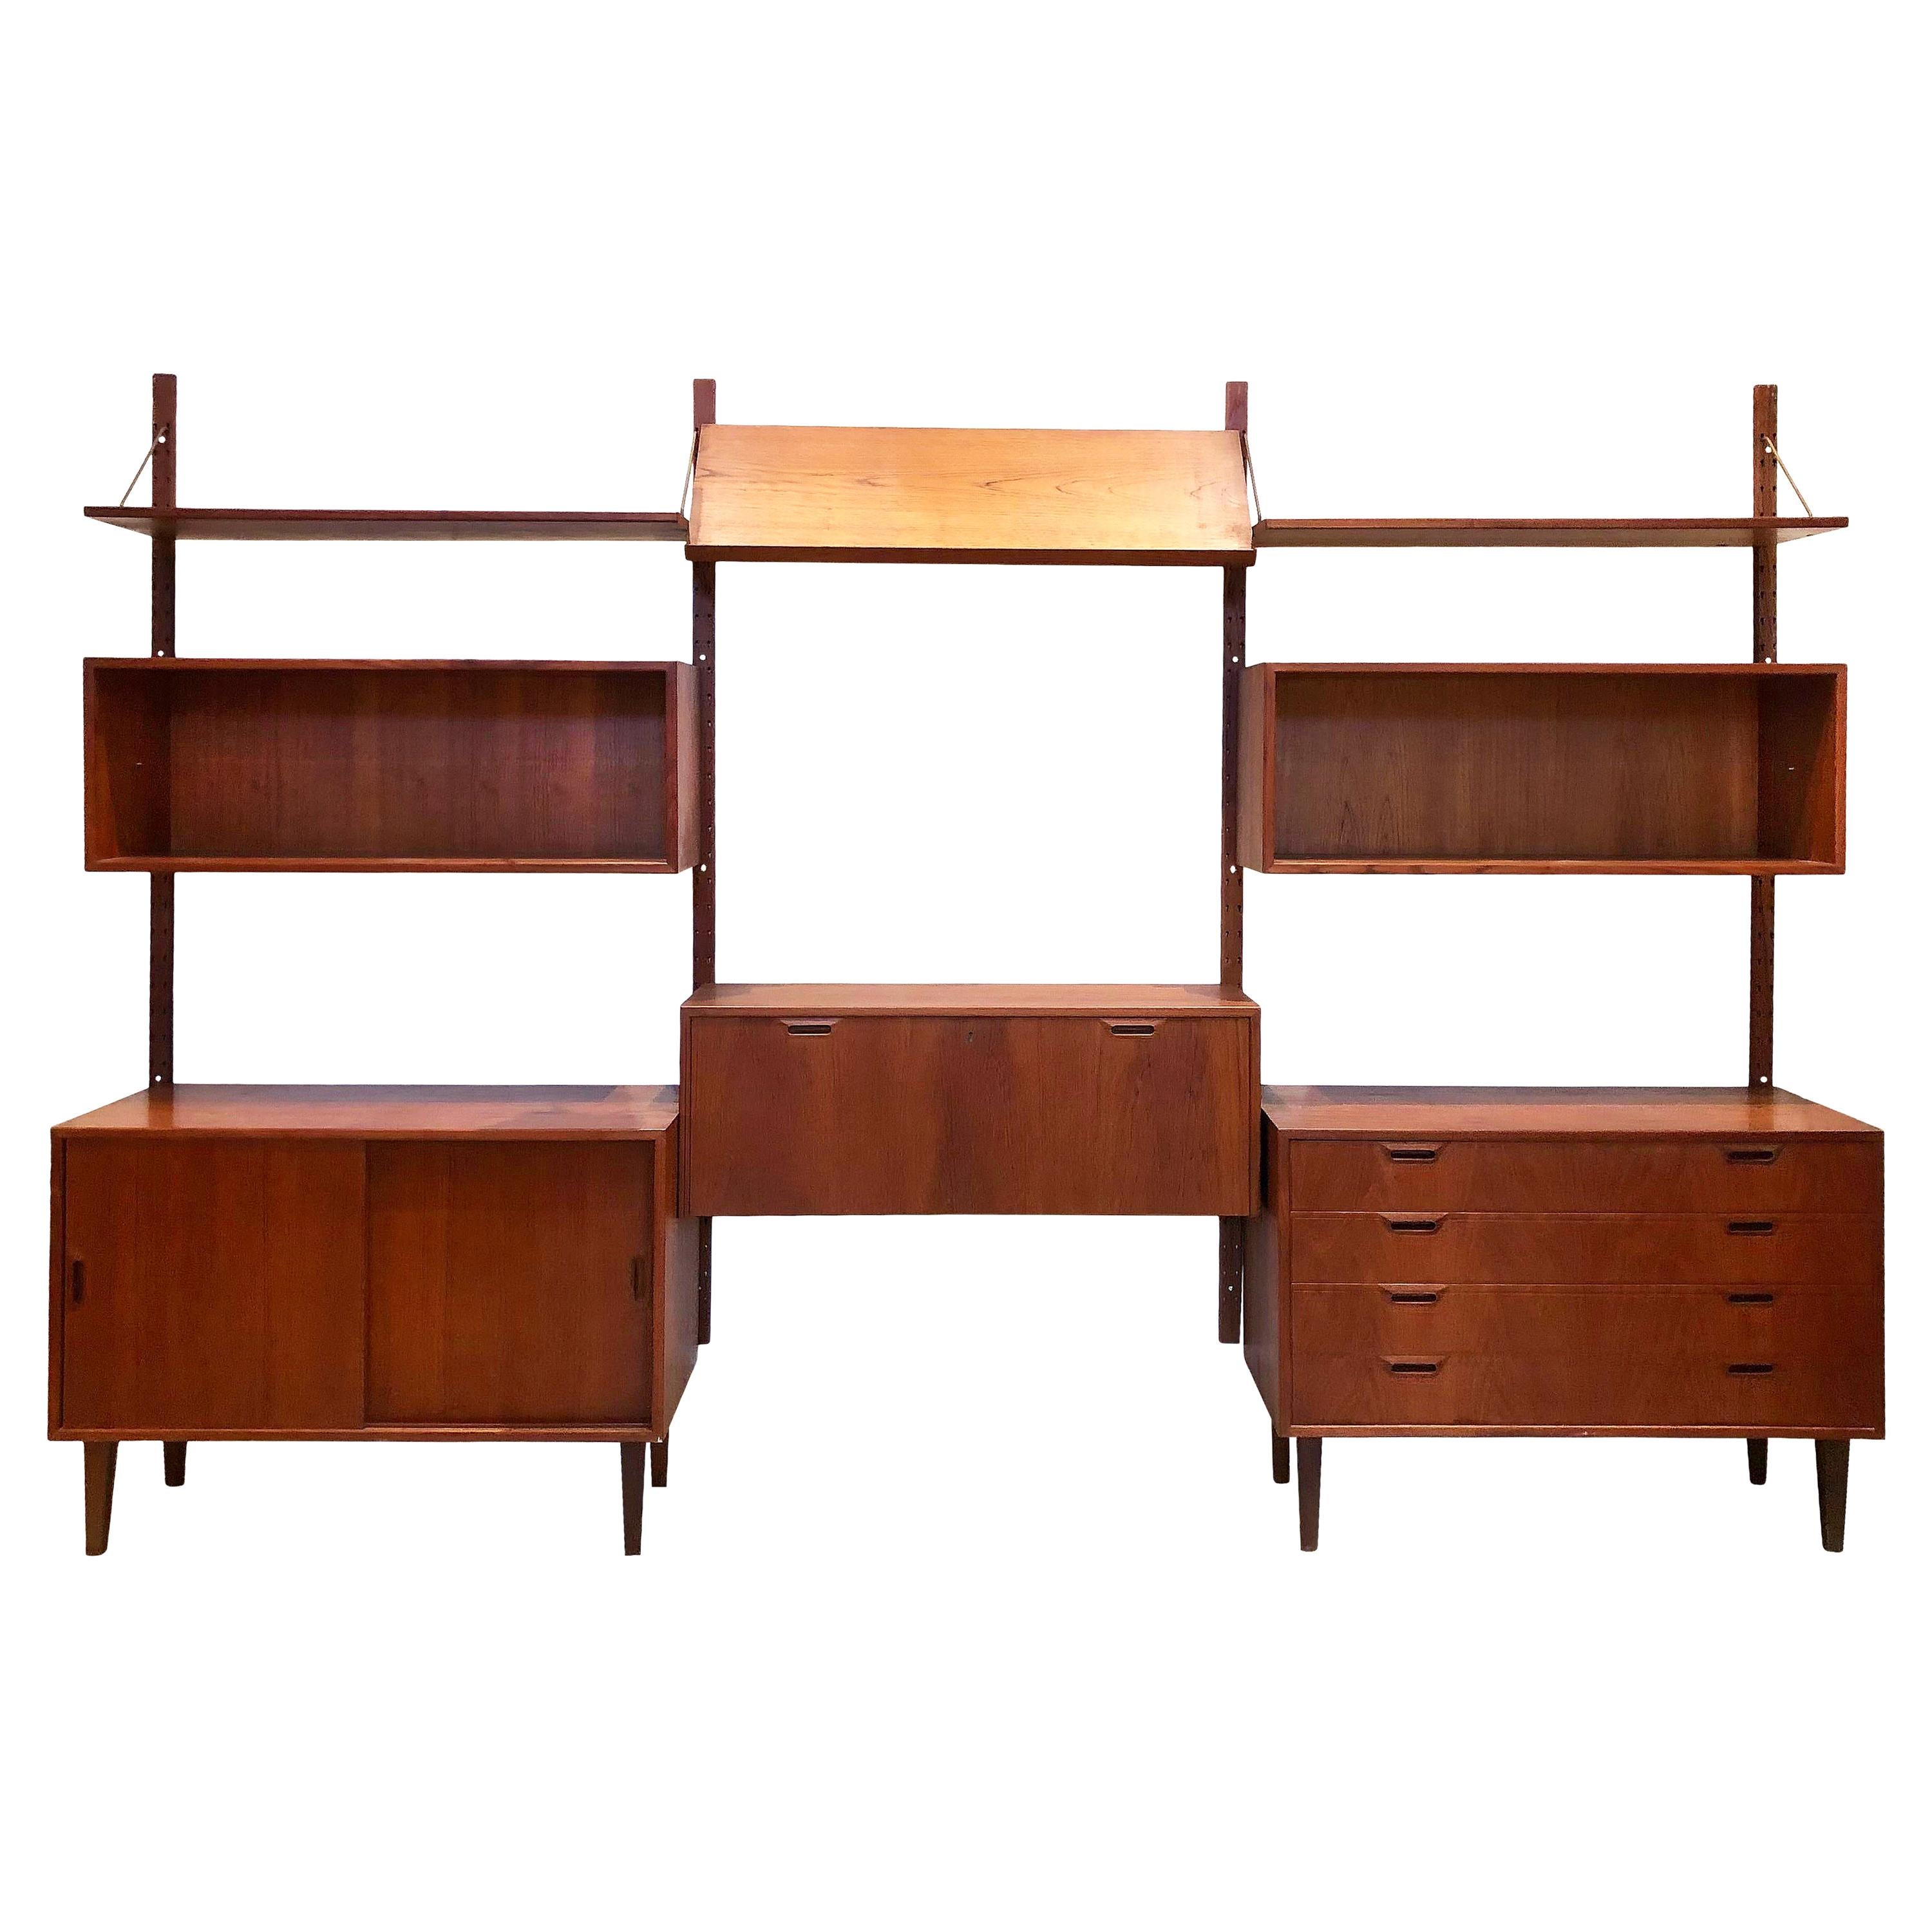  Danish Modern Teak Wall Unit by Poul Cadovius, Attributed, 1950s